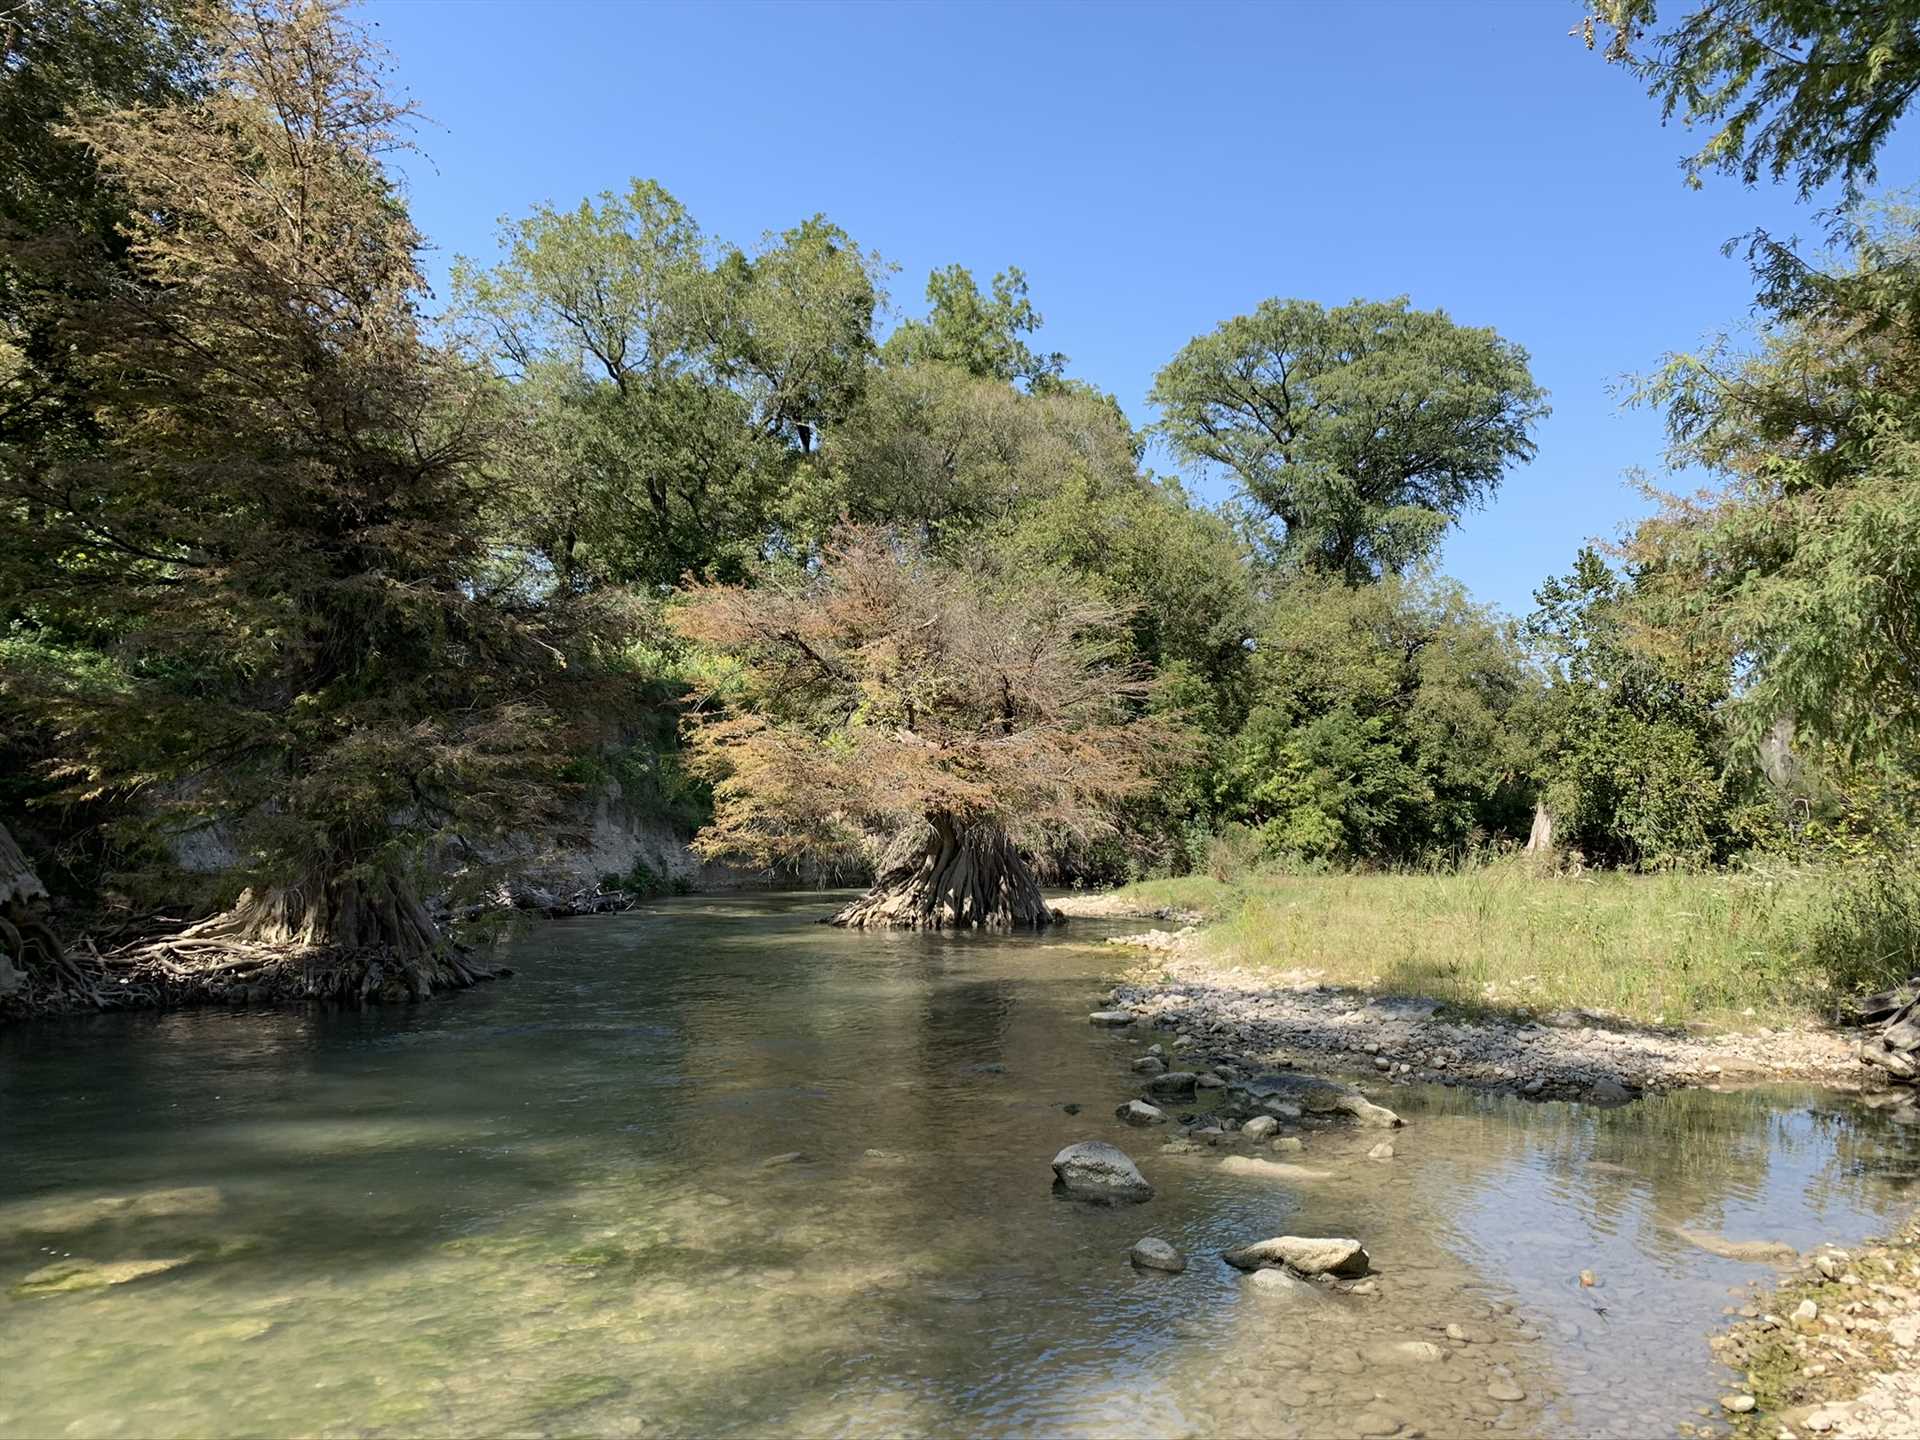                                                 Catch-and-release fishing, swimming, tubing, kayaking-you name it! It's all yours with private access to the Guadalupe River.